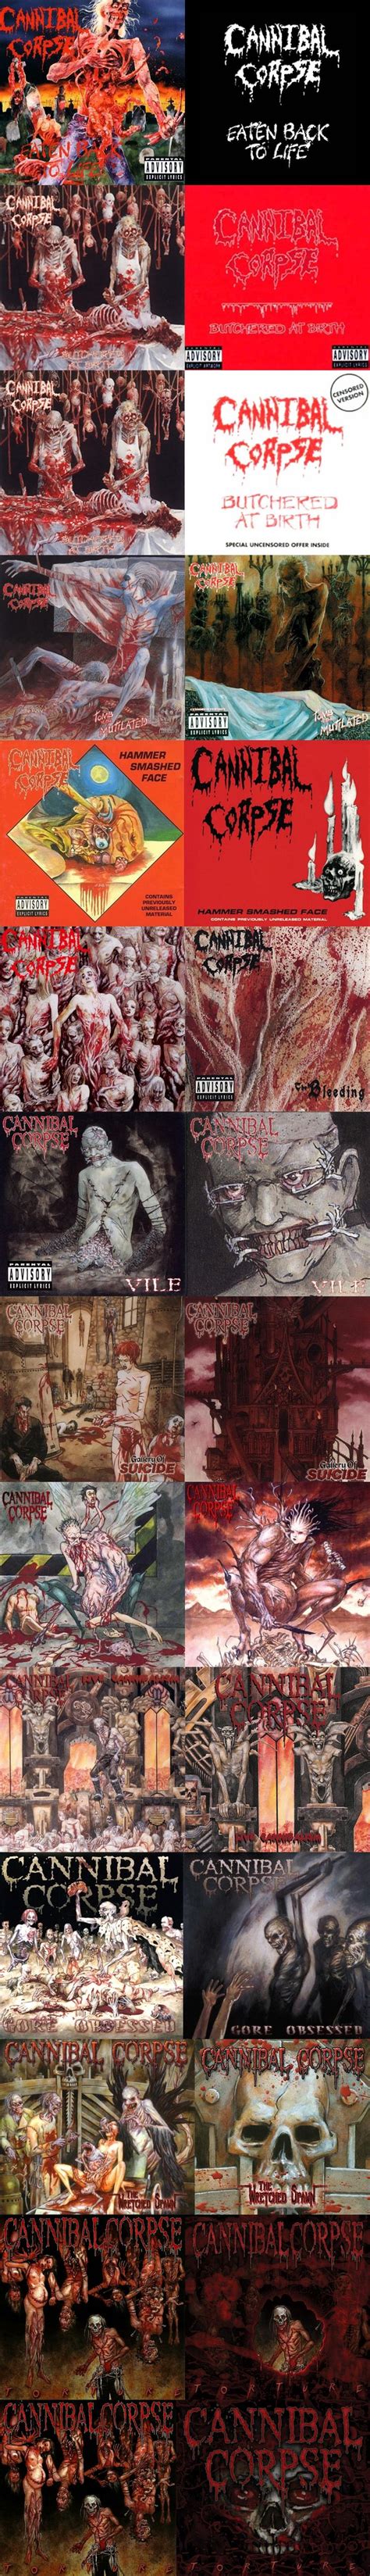 Cannibal Corpse Uncensored And Censored Versions Of Their Album